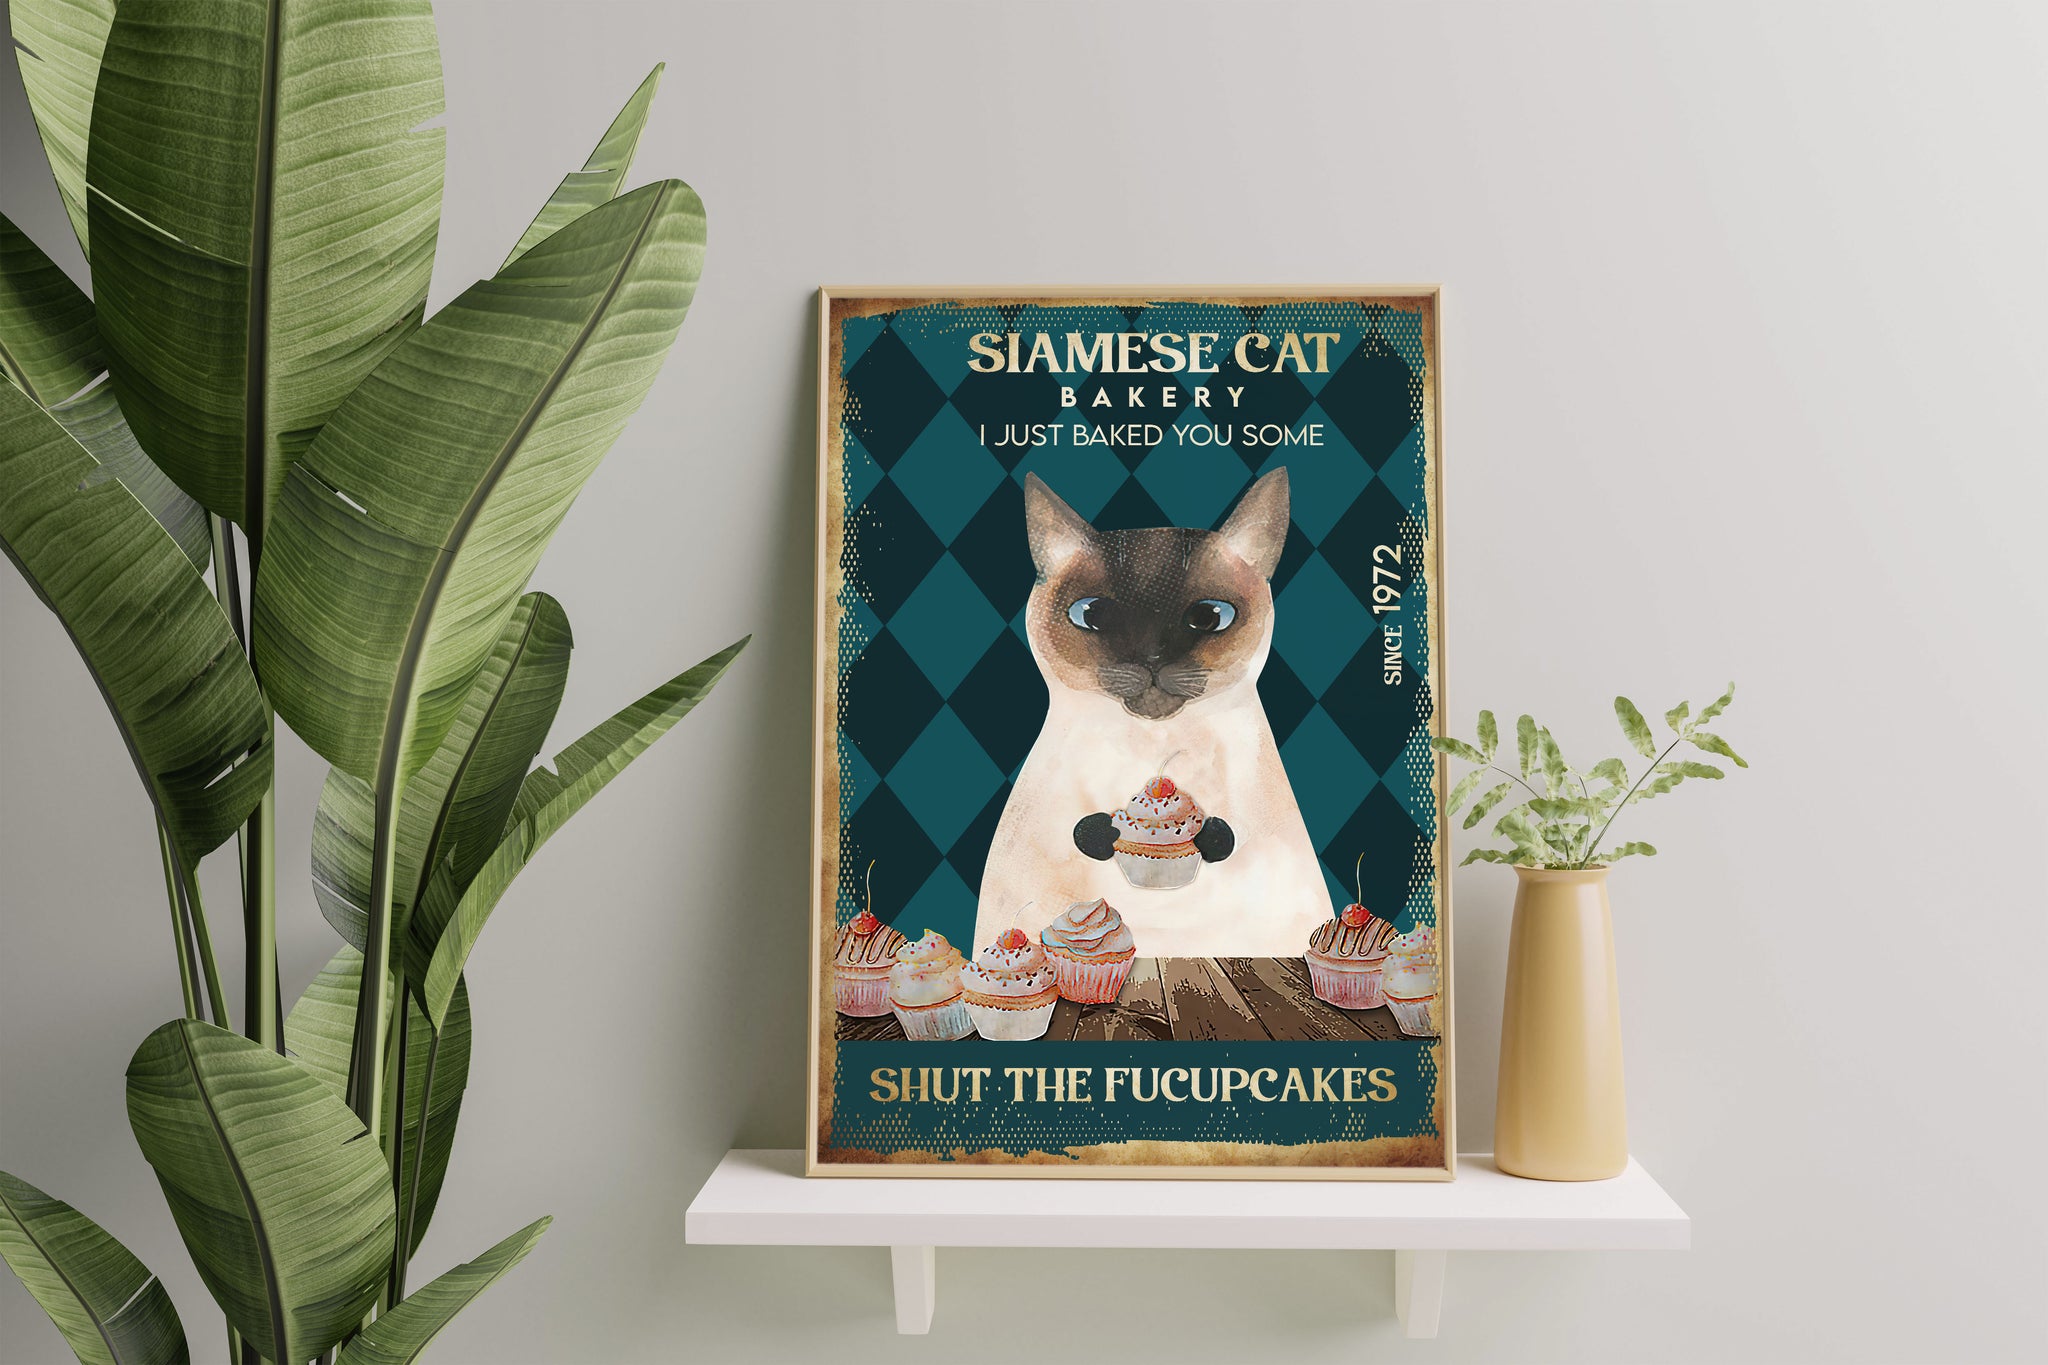 Siamese Cat Bakery I Just Baked You Some Shut The Fucupcakes